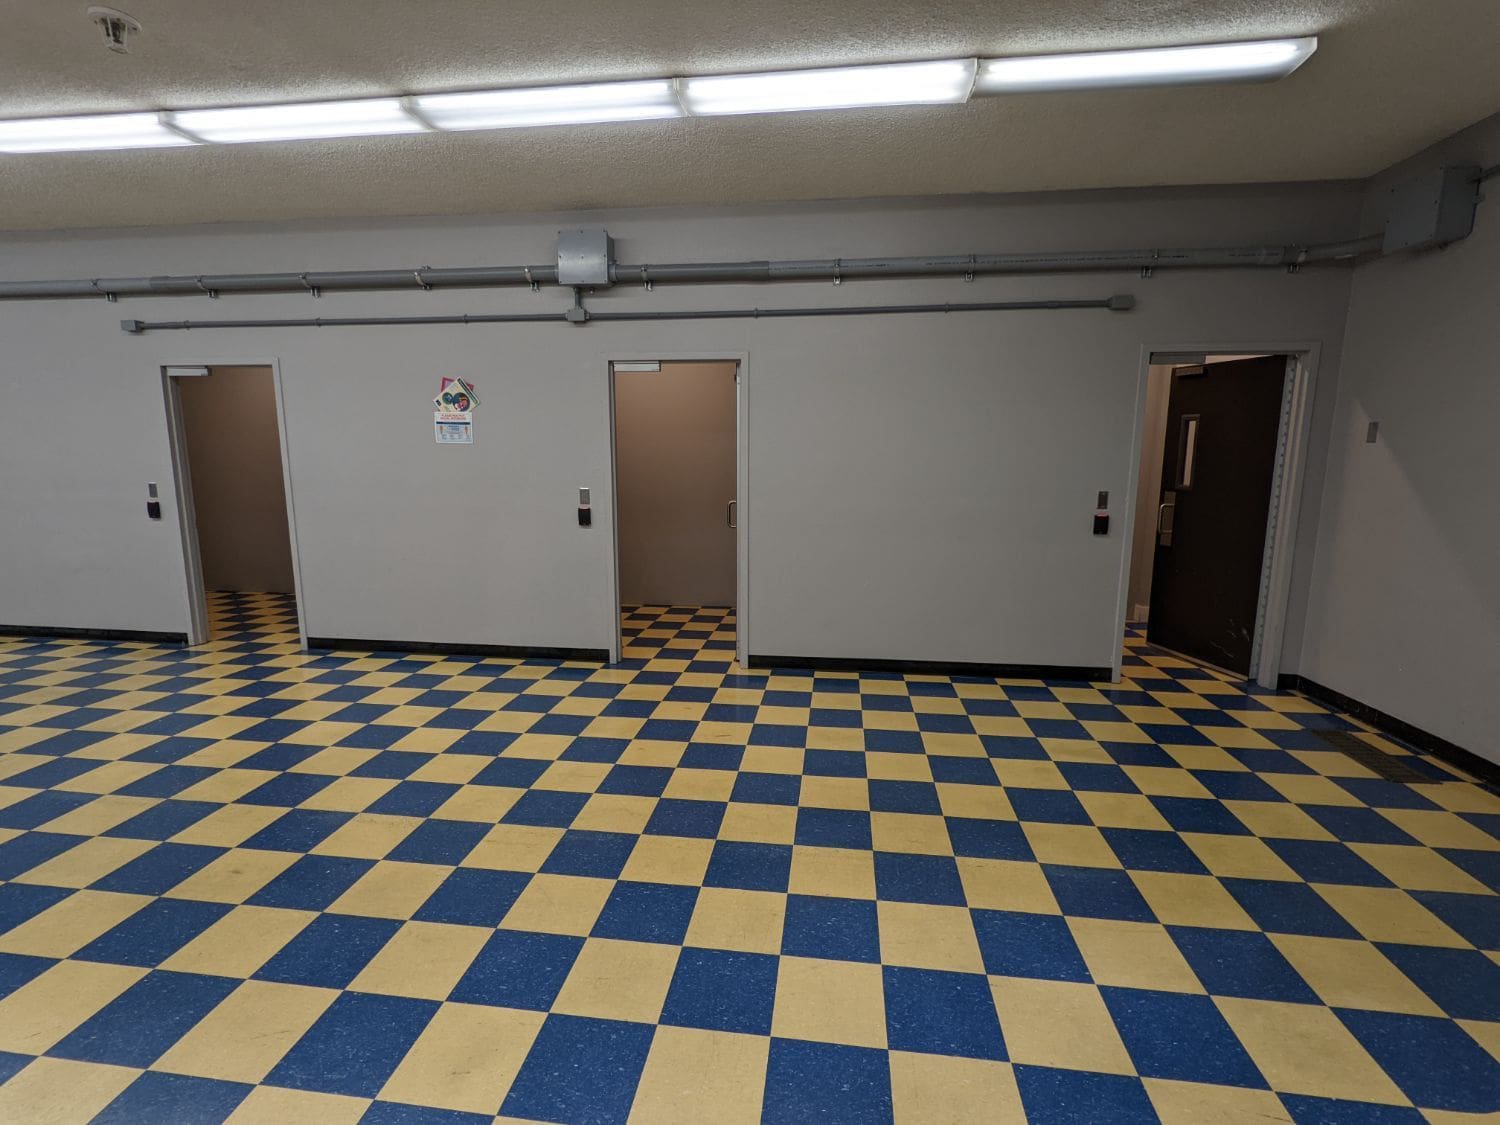 A checkered floor is shown beneath three doors that lead to small windowless rooms. There are fluorescent lights above.